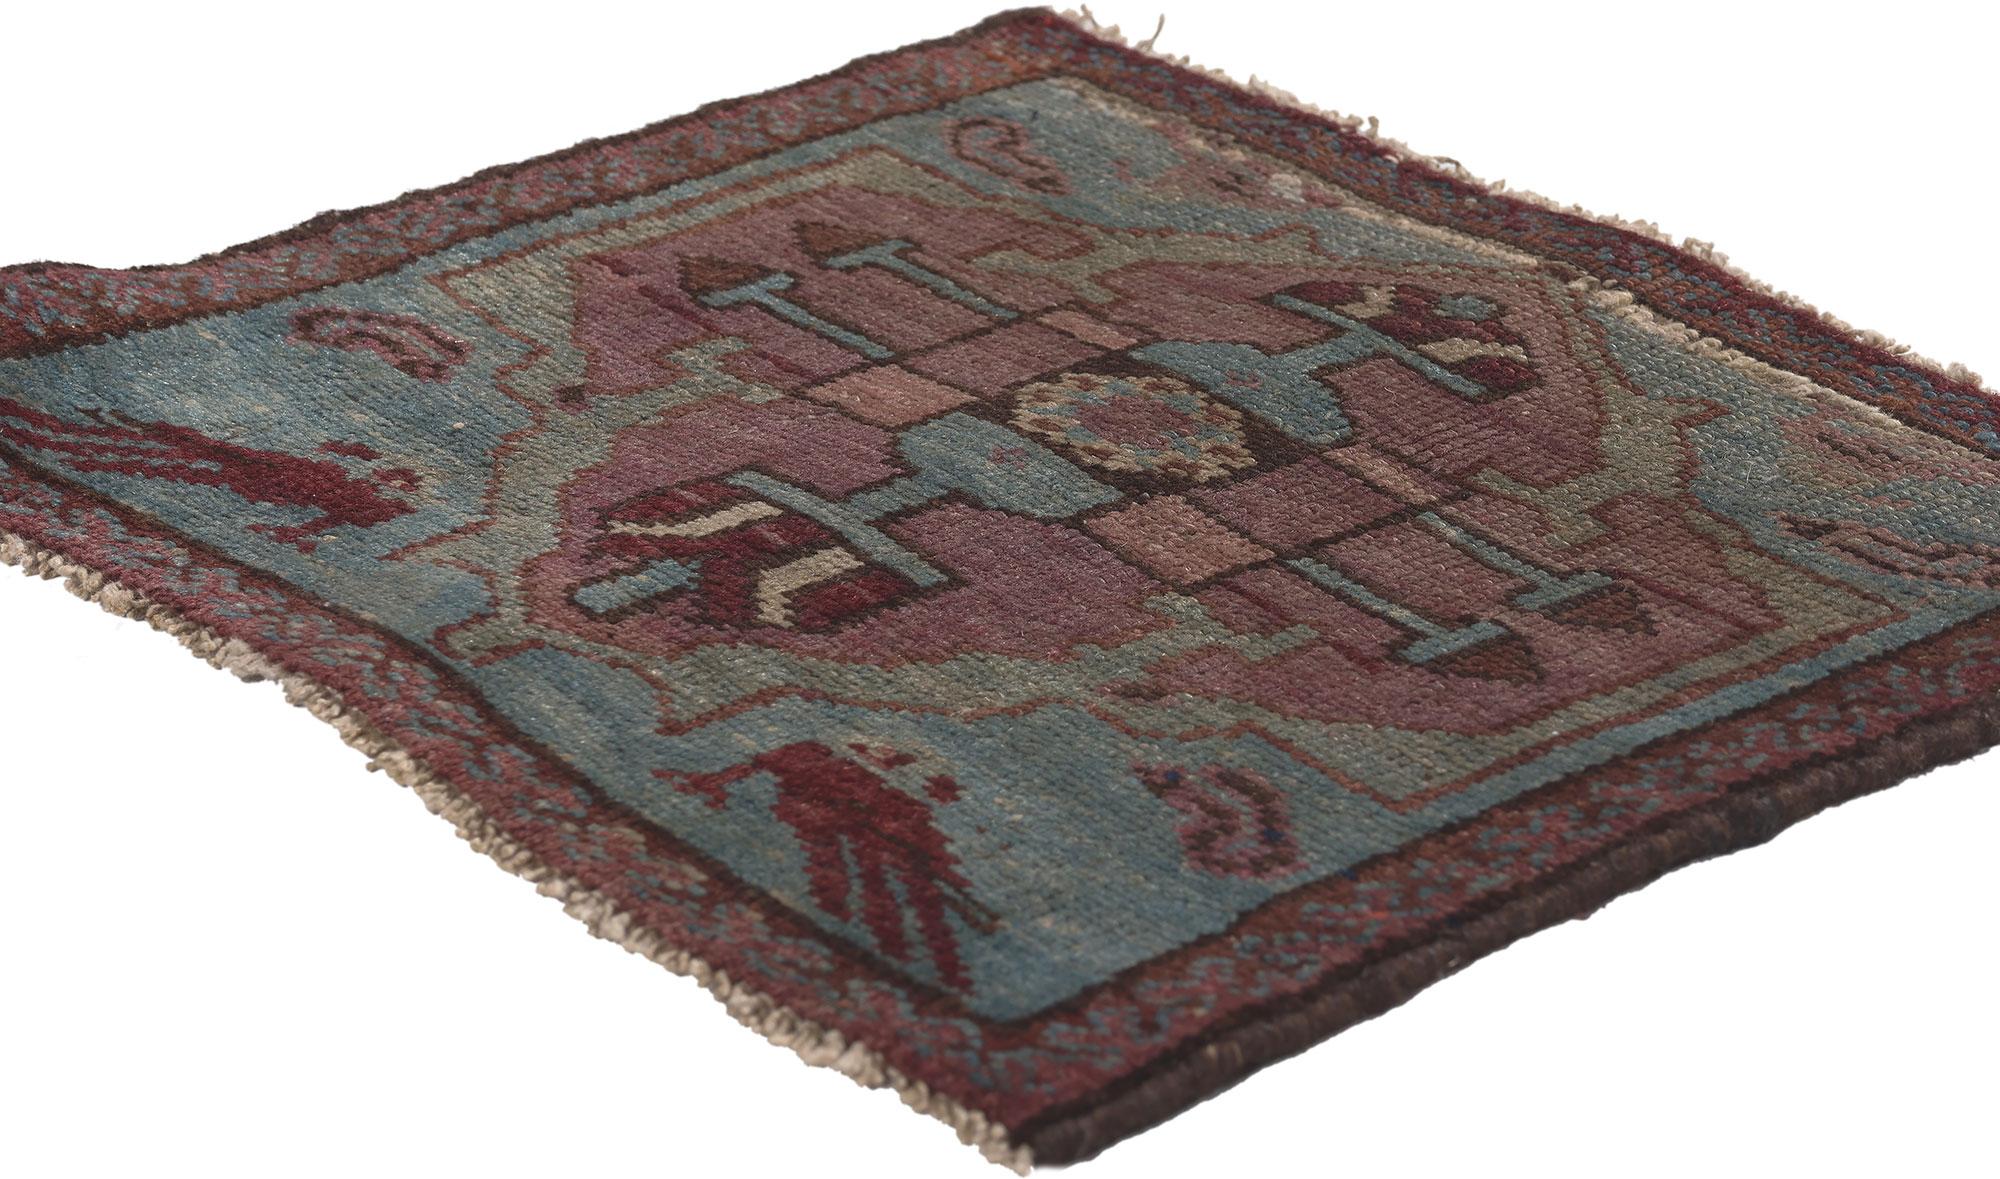 A Pair of Small Antique Persian Malayer Rugs.
Renaissance style and beguiling charm collide in this pair of hand knotted wool antique Persian Malayer rugs. The Romanesque design and Renaissance color palette woven into each piece work together